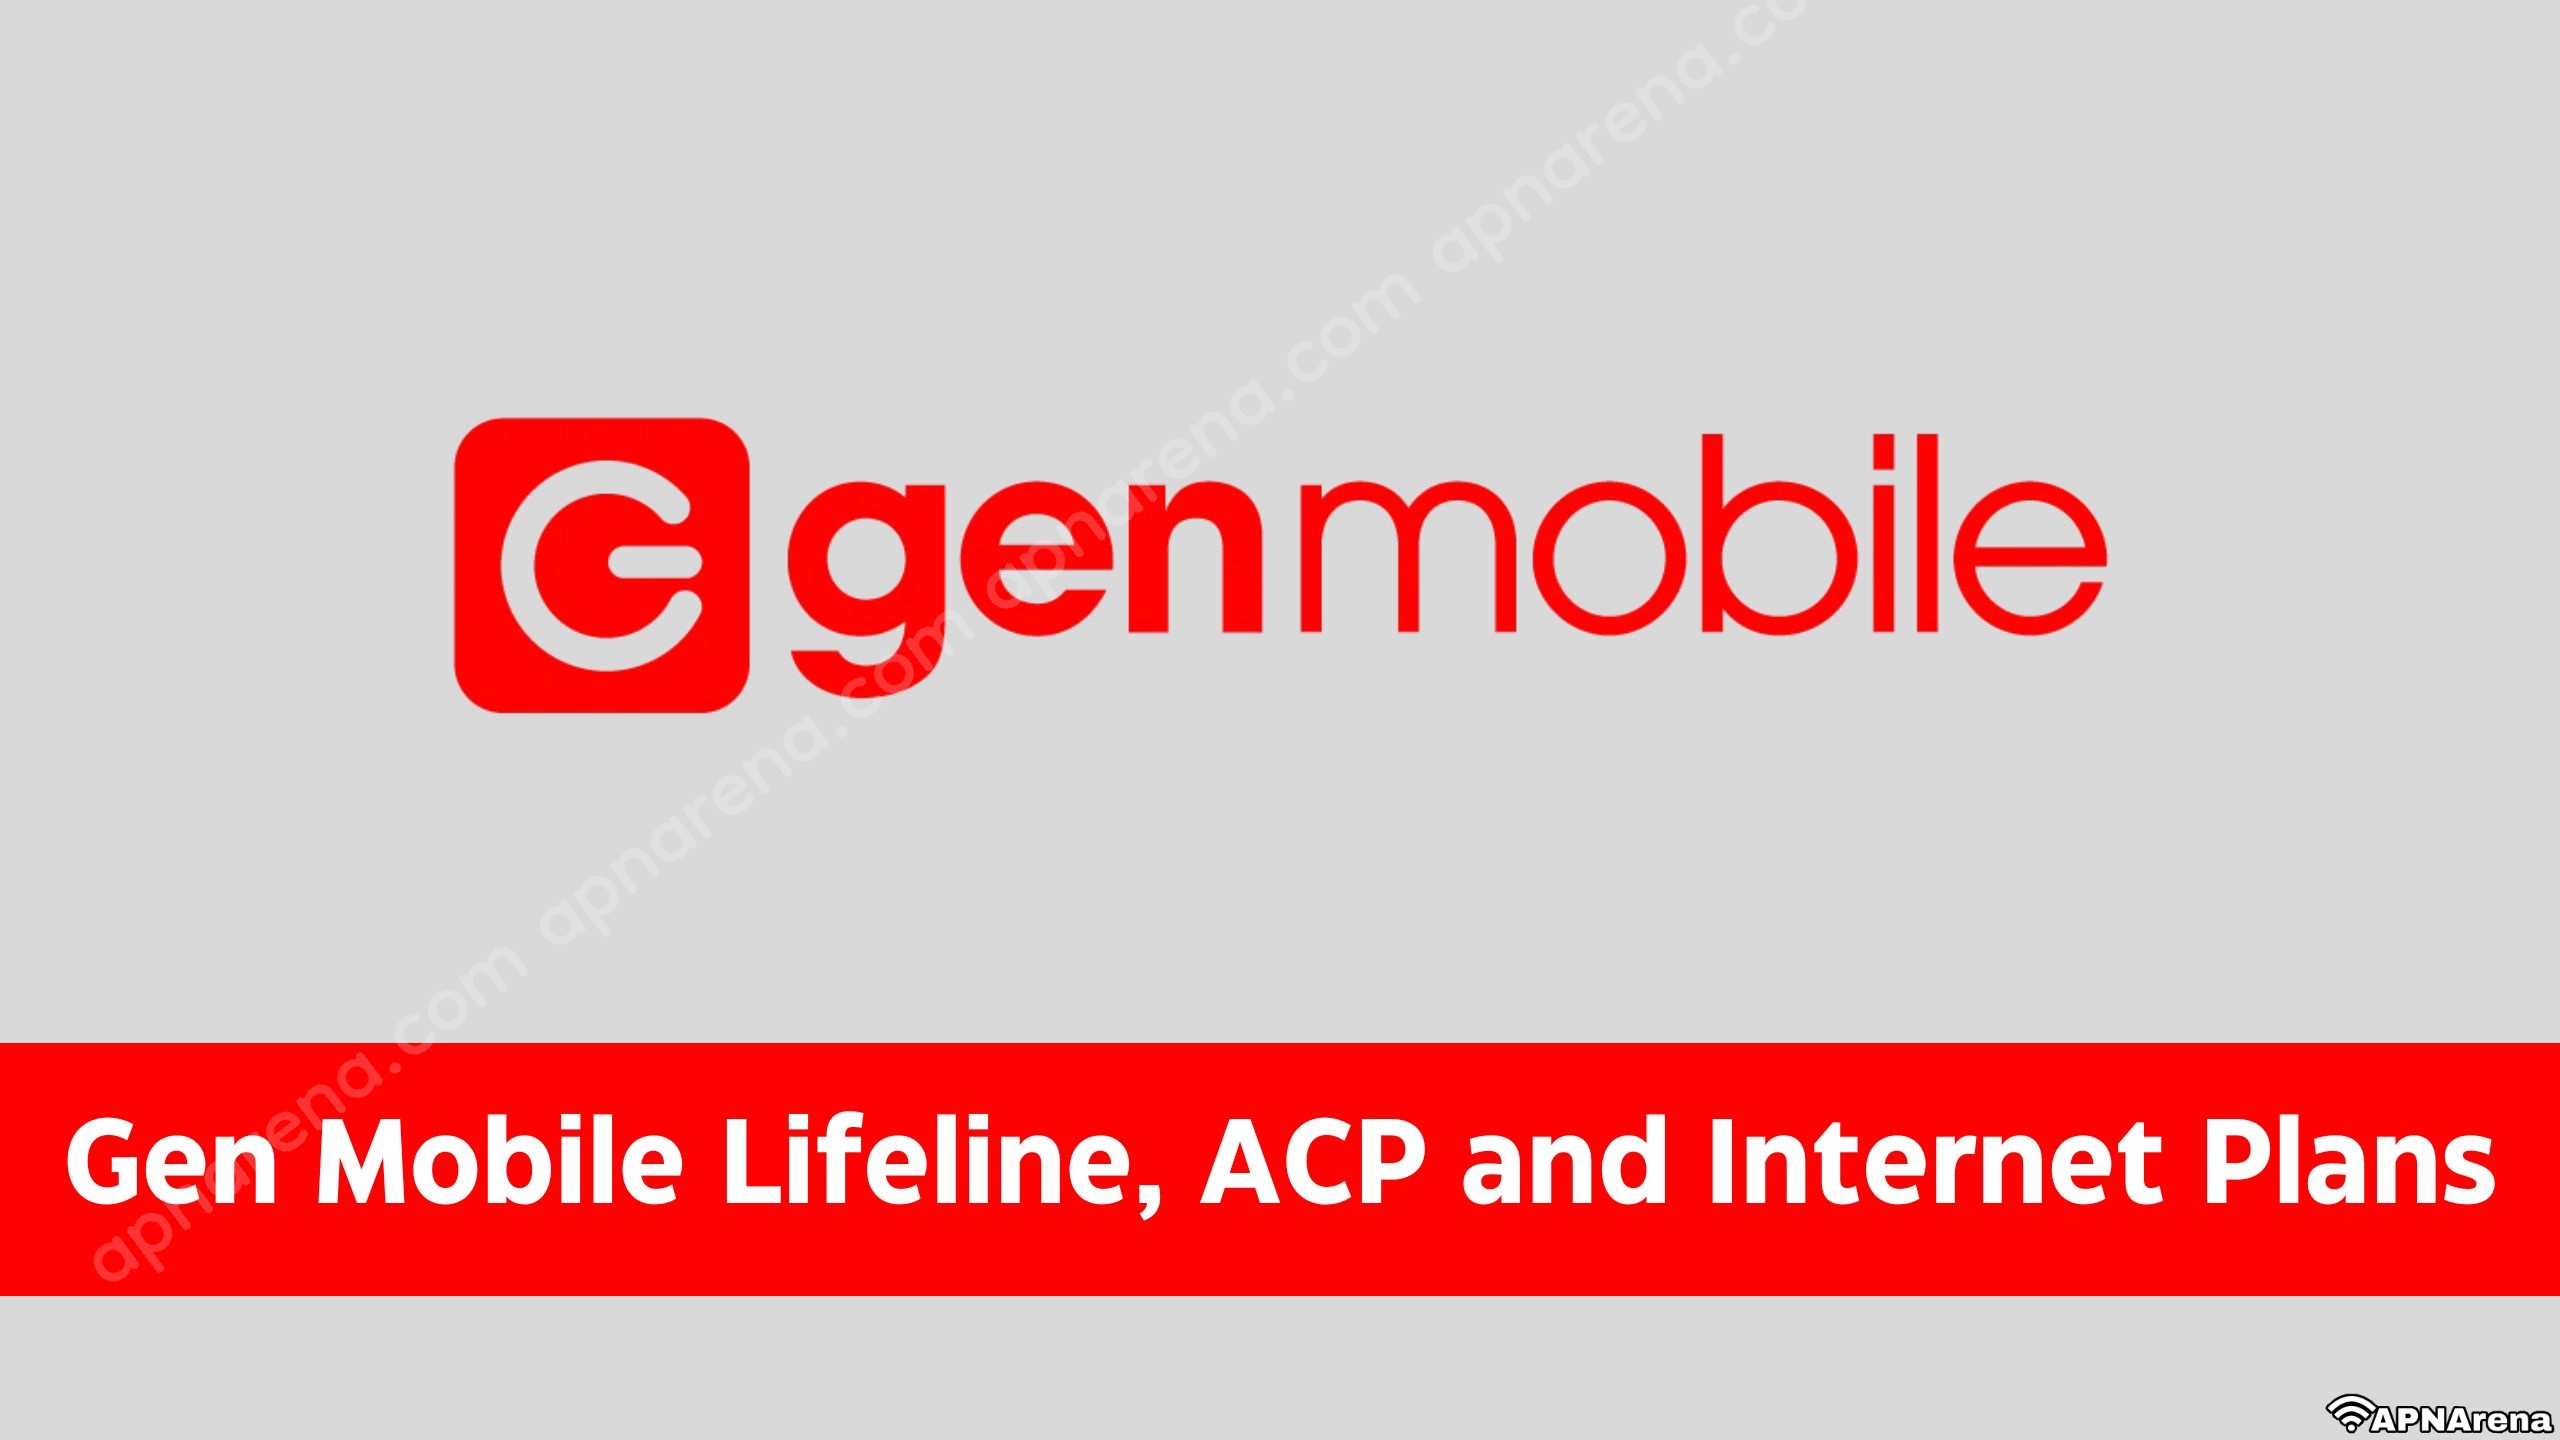 Gen Mobile Free Government Phone, Unlimited Data with Lifeline and ACP , Phone and Data Plans